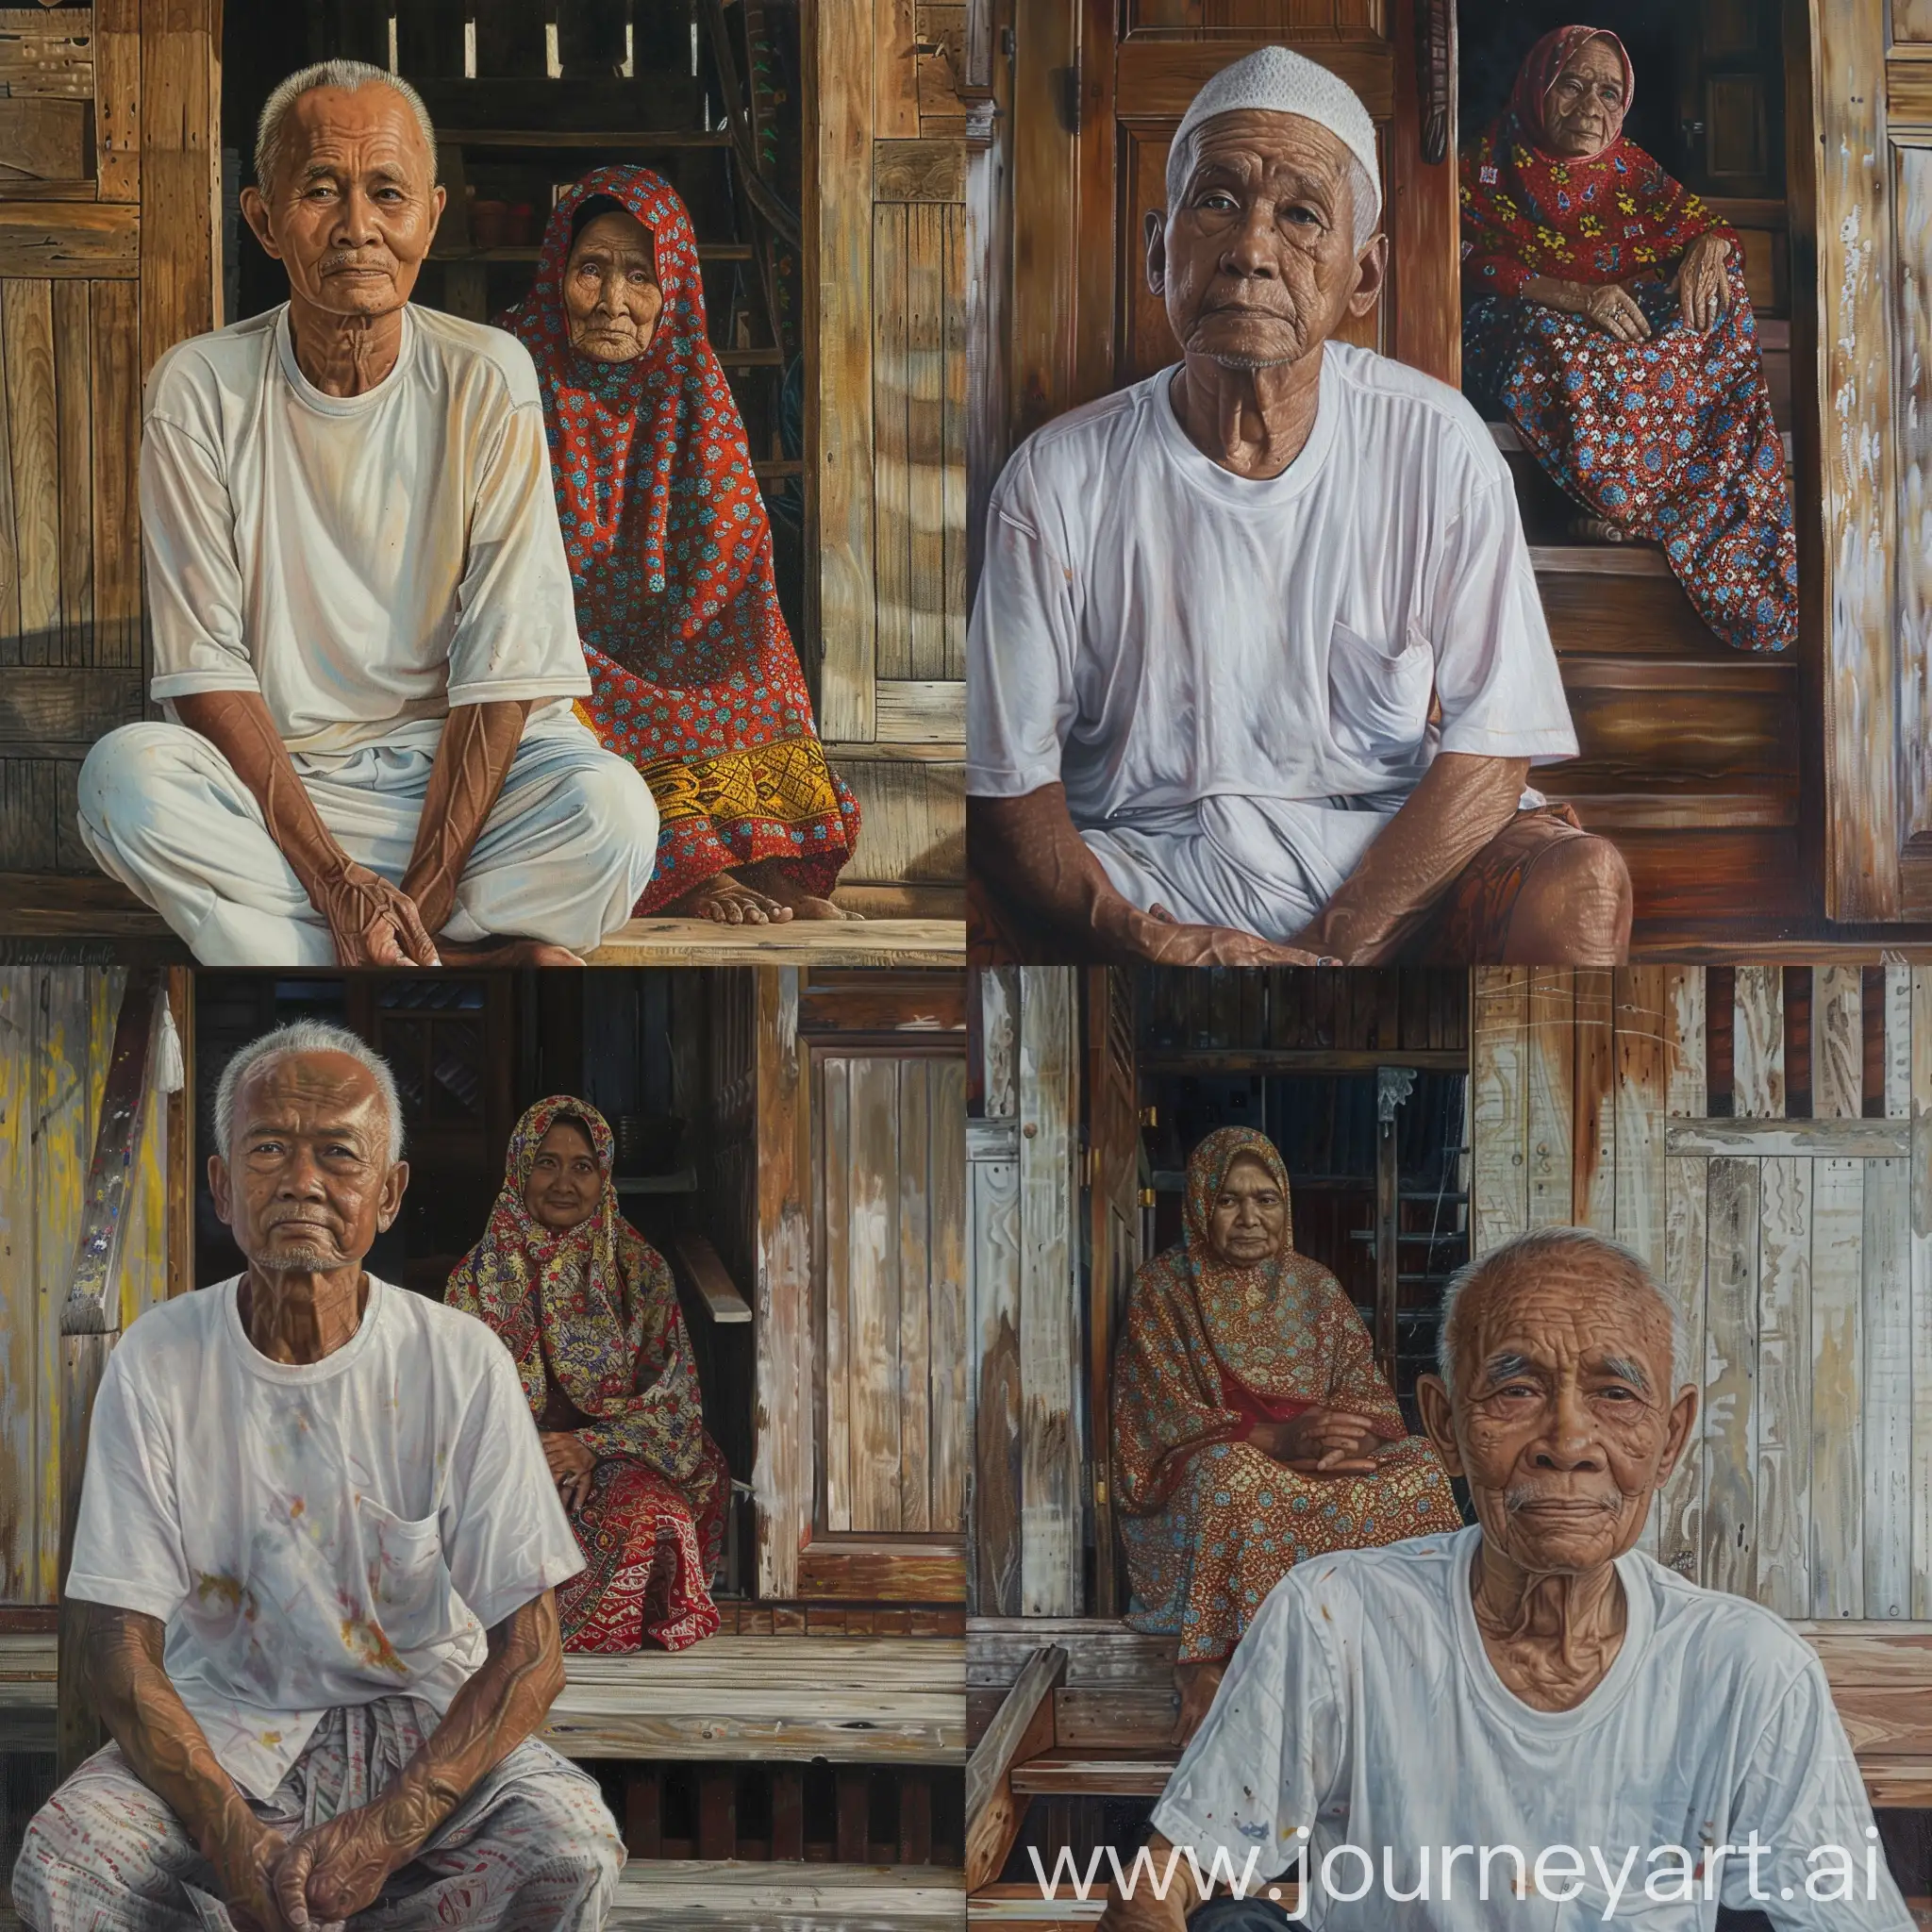 an Old Malay man. wearing a white songkok. wearing a white t-shirt. wear a square-patterned sarong. sitting cross-legged in front of the door. an old Malay woman. hijab wearing a baju kurung patterned with small blue flowers. wearing red batik fabric with a yellow flower pattern. sitting on the stairs. wooden house. Oil painting technique 